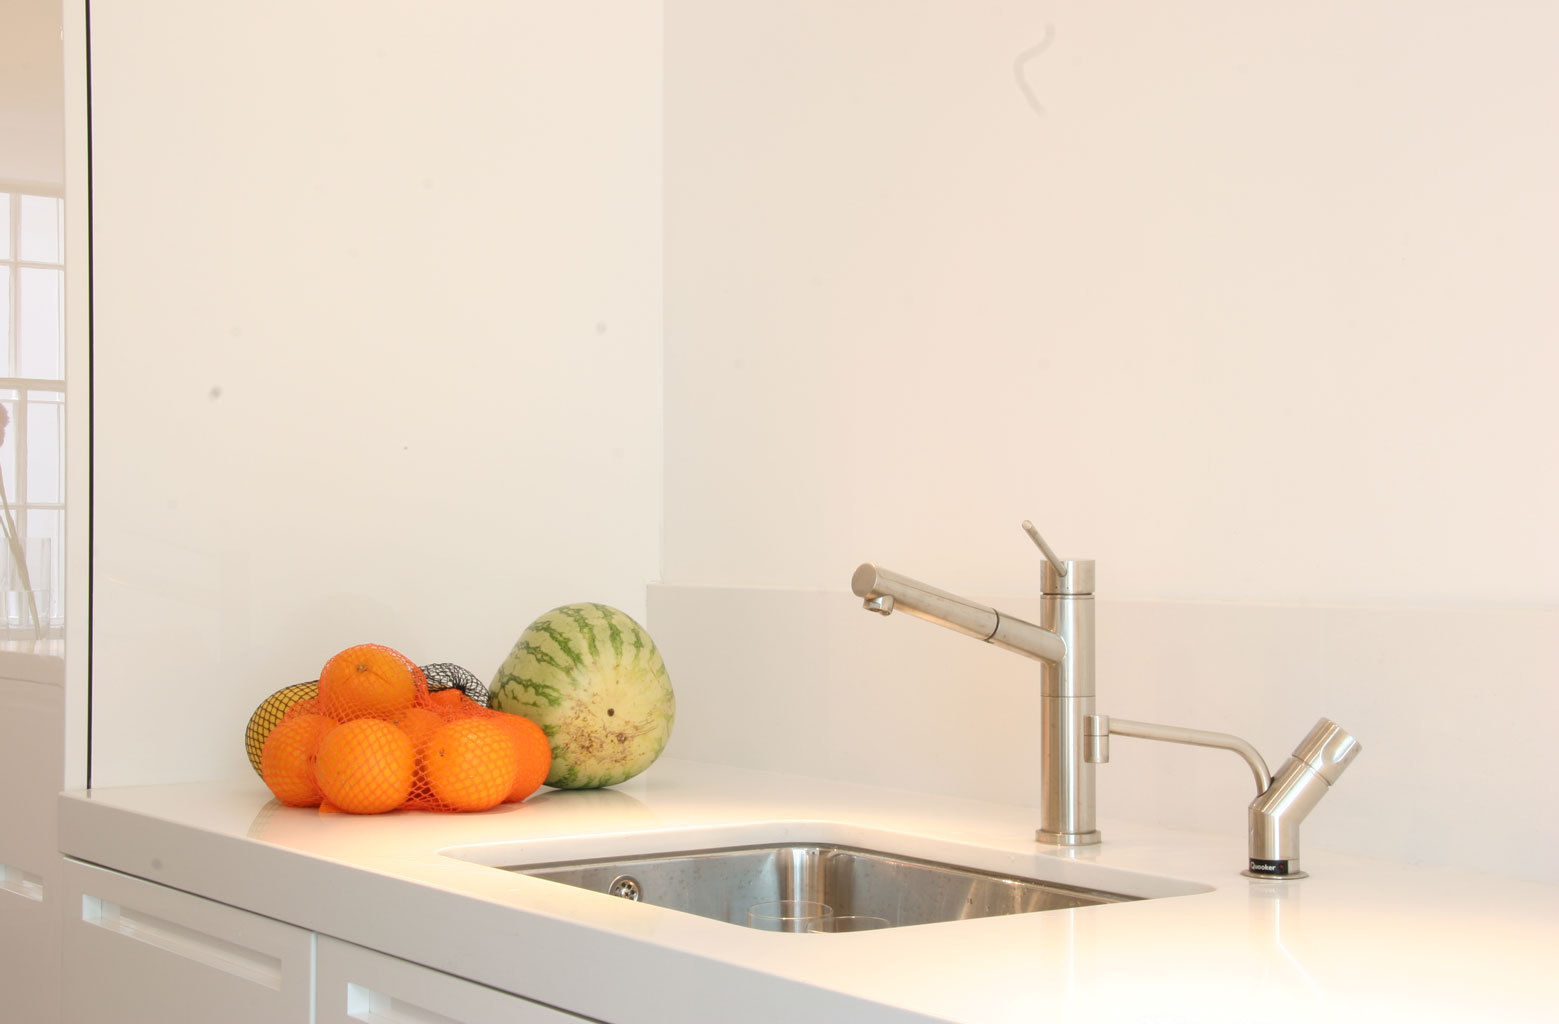 Hampstead, Gregory Phillips Architects Gregory Phillips Architects Minimalist kitchen Sinks & taps